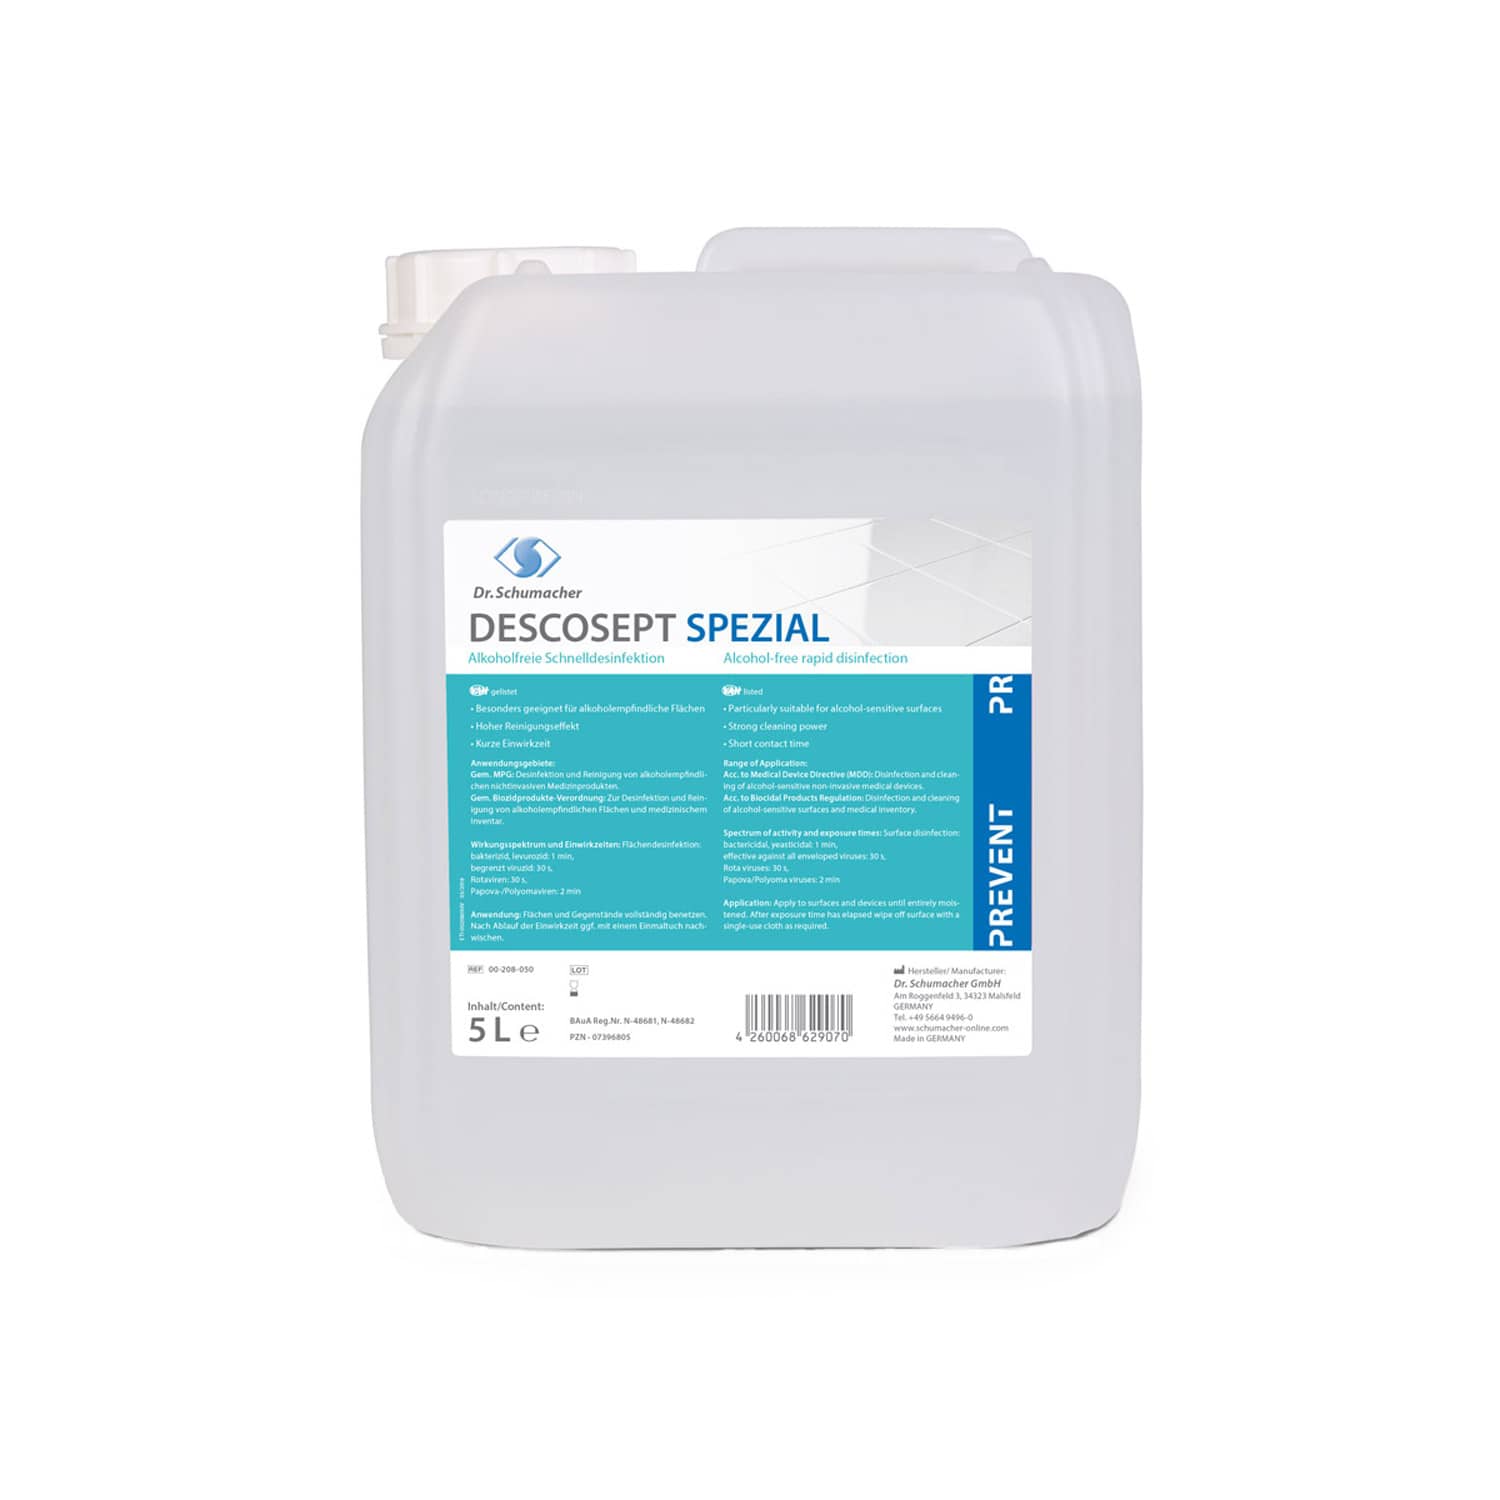 Descosept Spezial Rapid Disinfection With High Cleaning Power